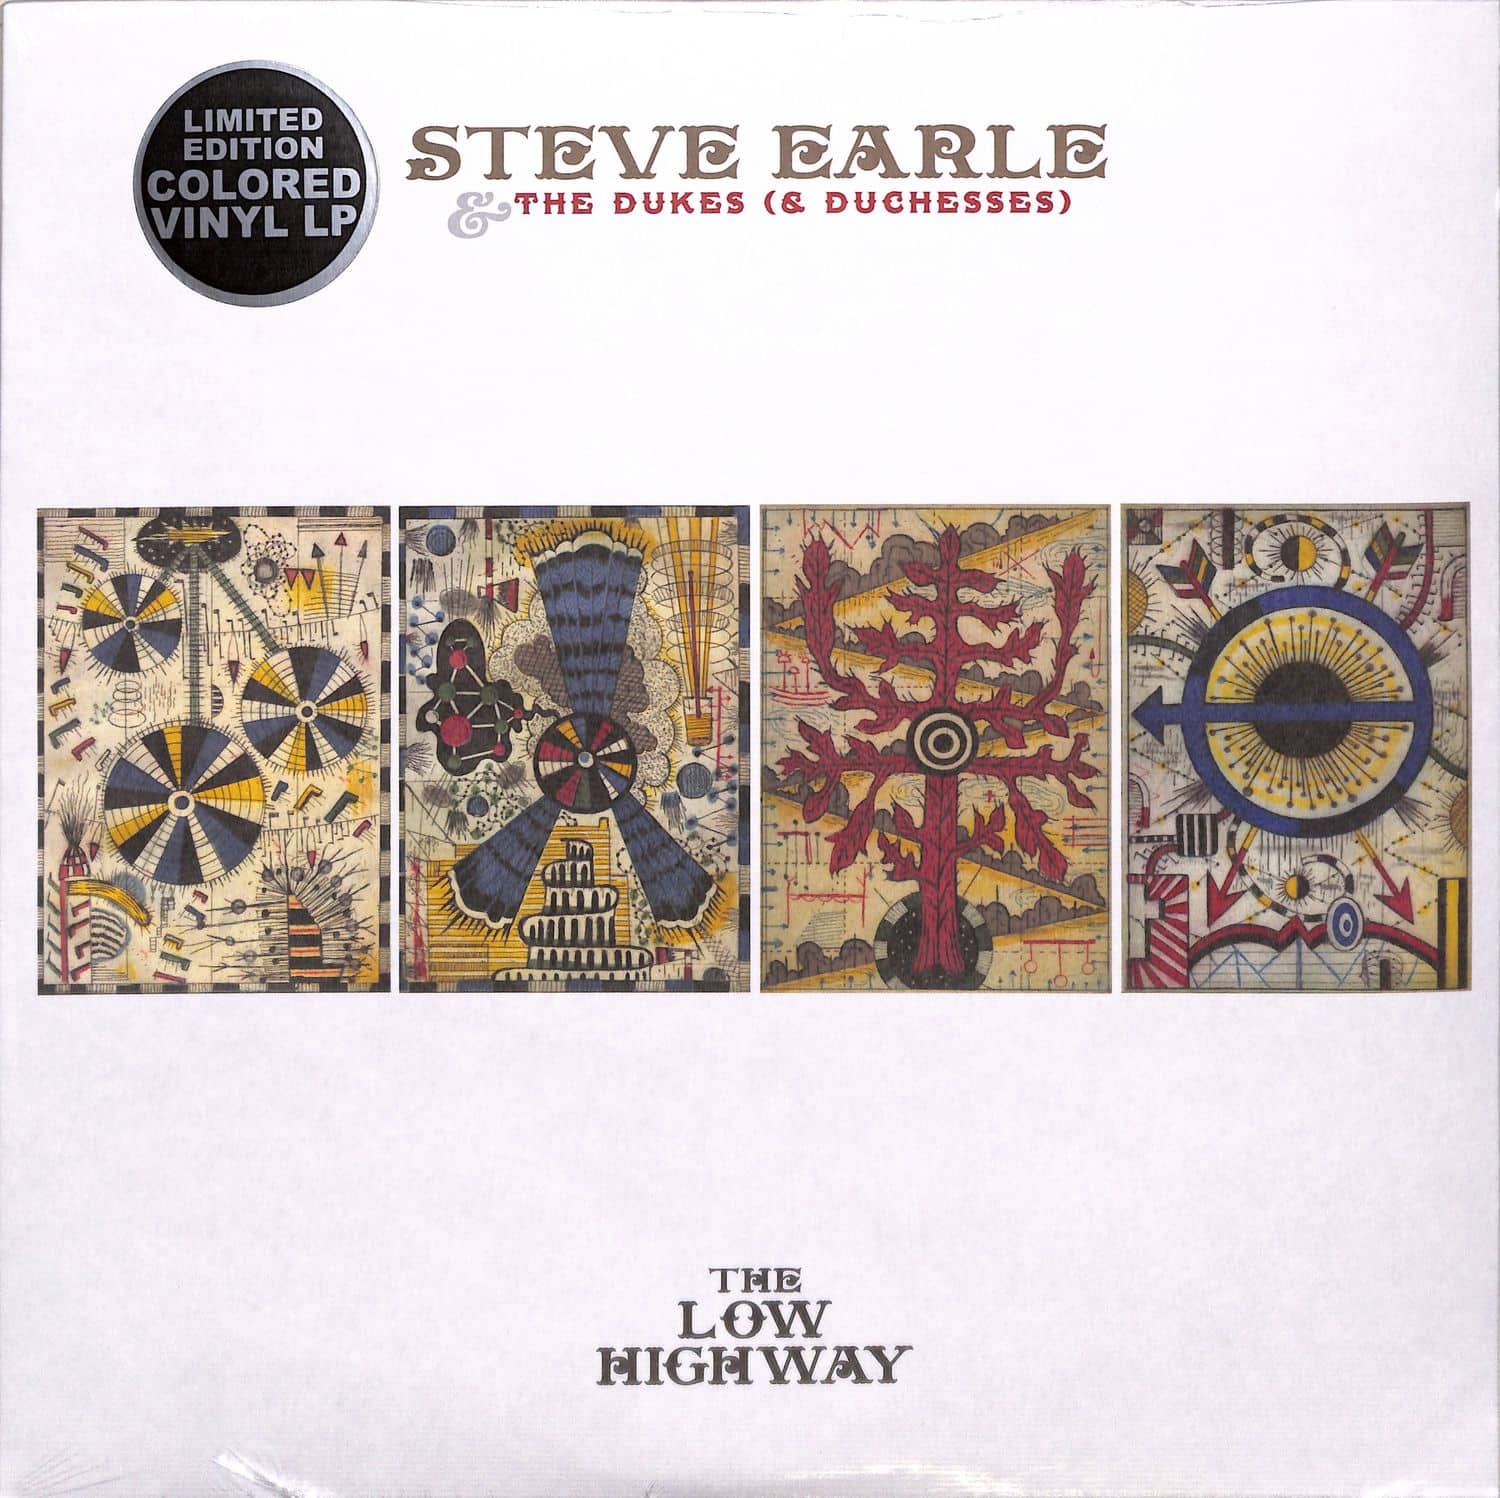 Steve Earle & The Dukes  - THE LOW HIGHWAY 